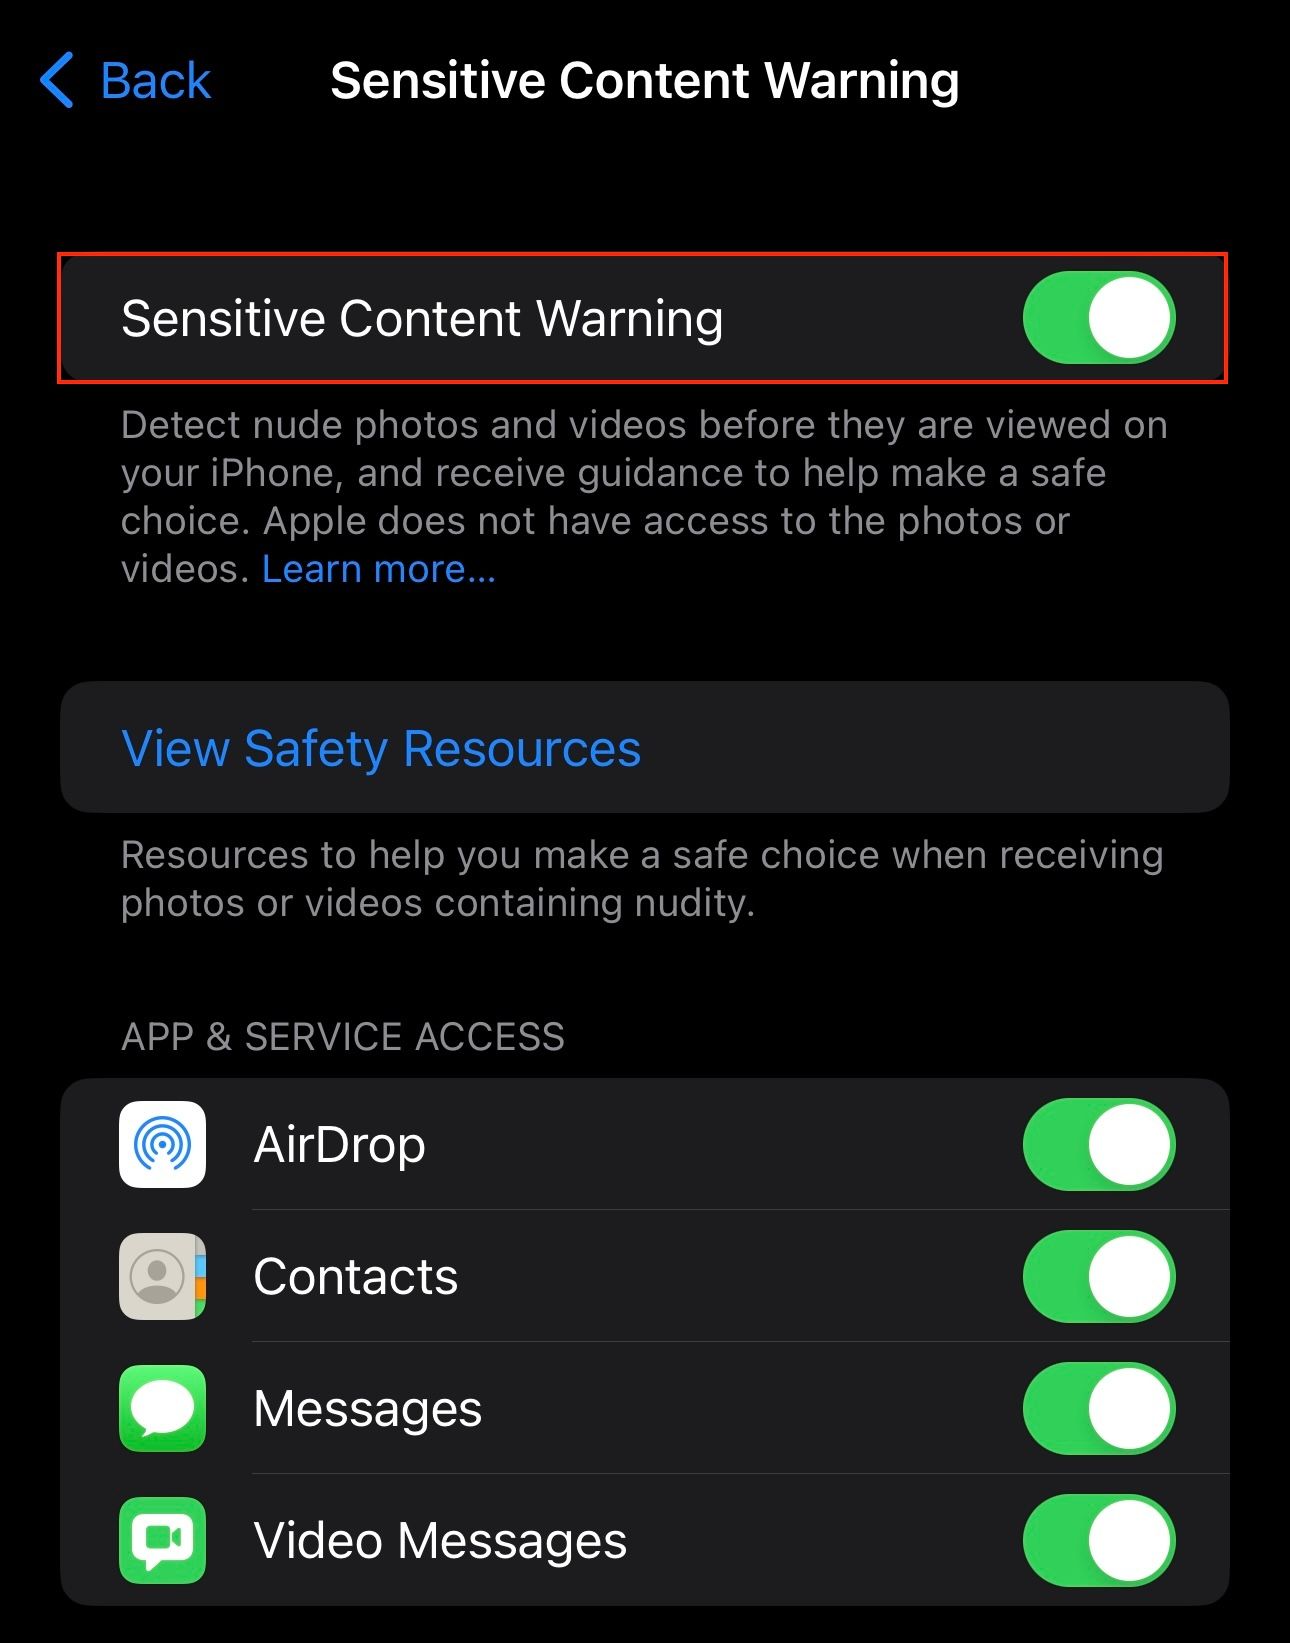 Sensitive Content Warning feaured enabled on iPhone.